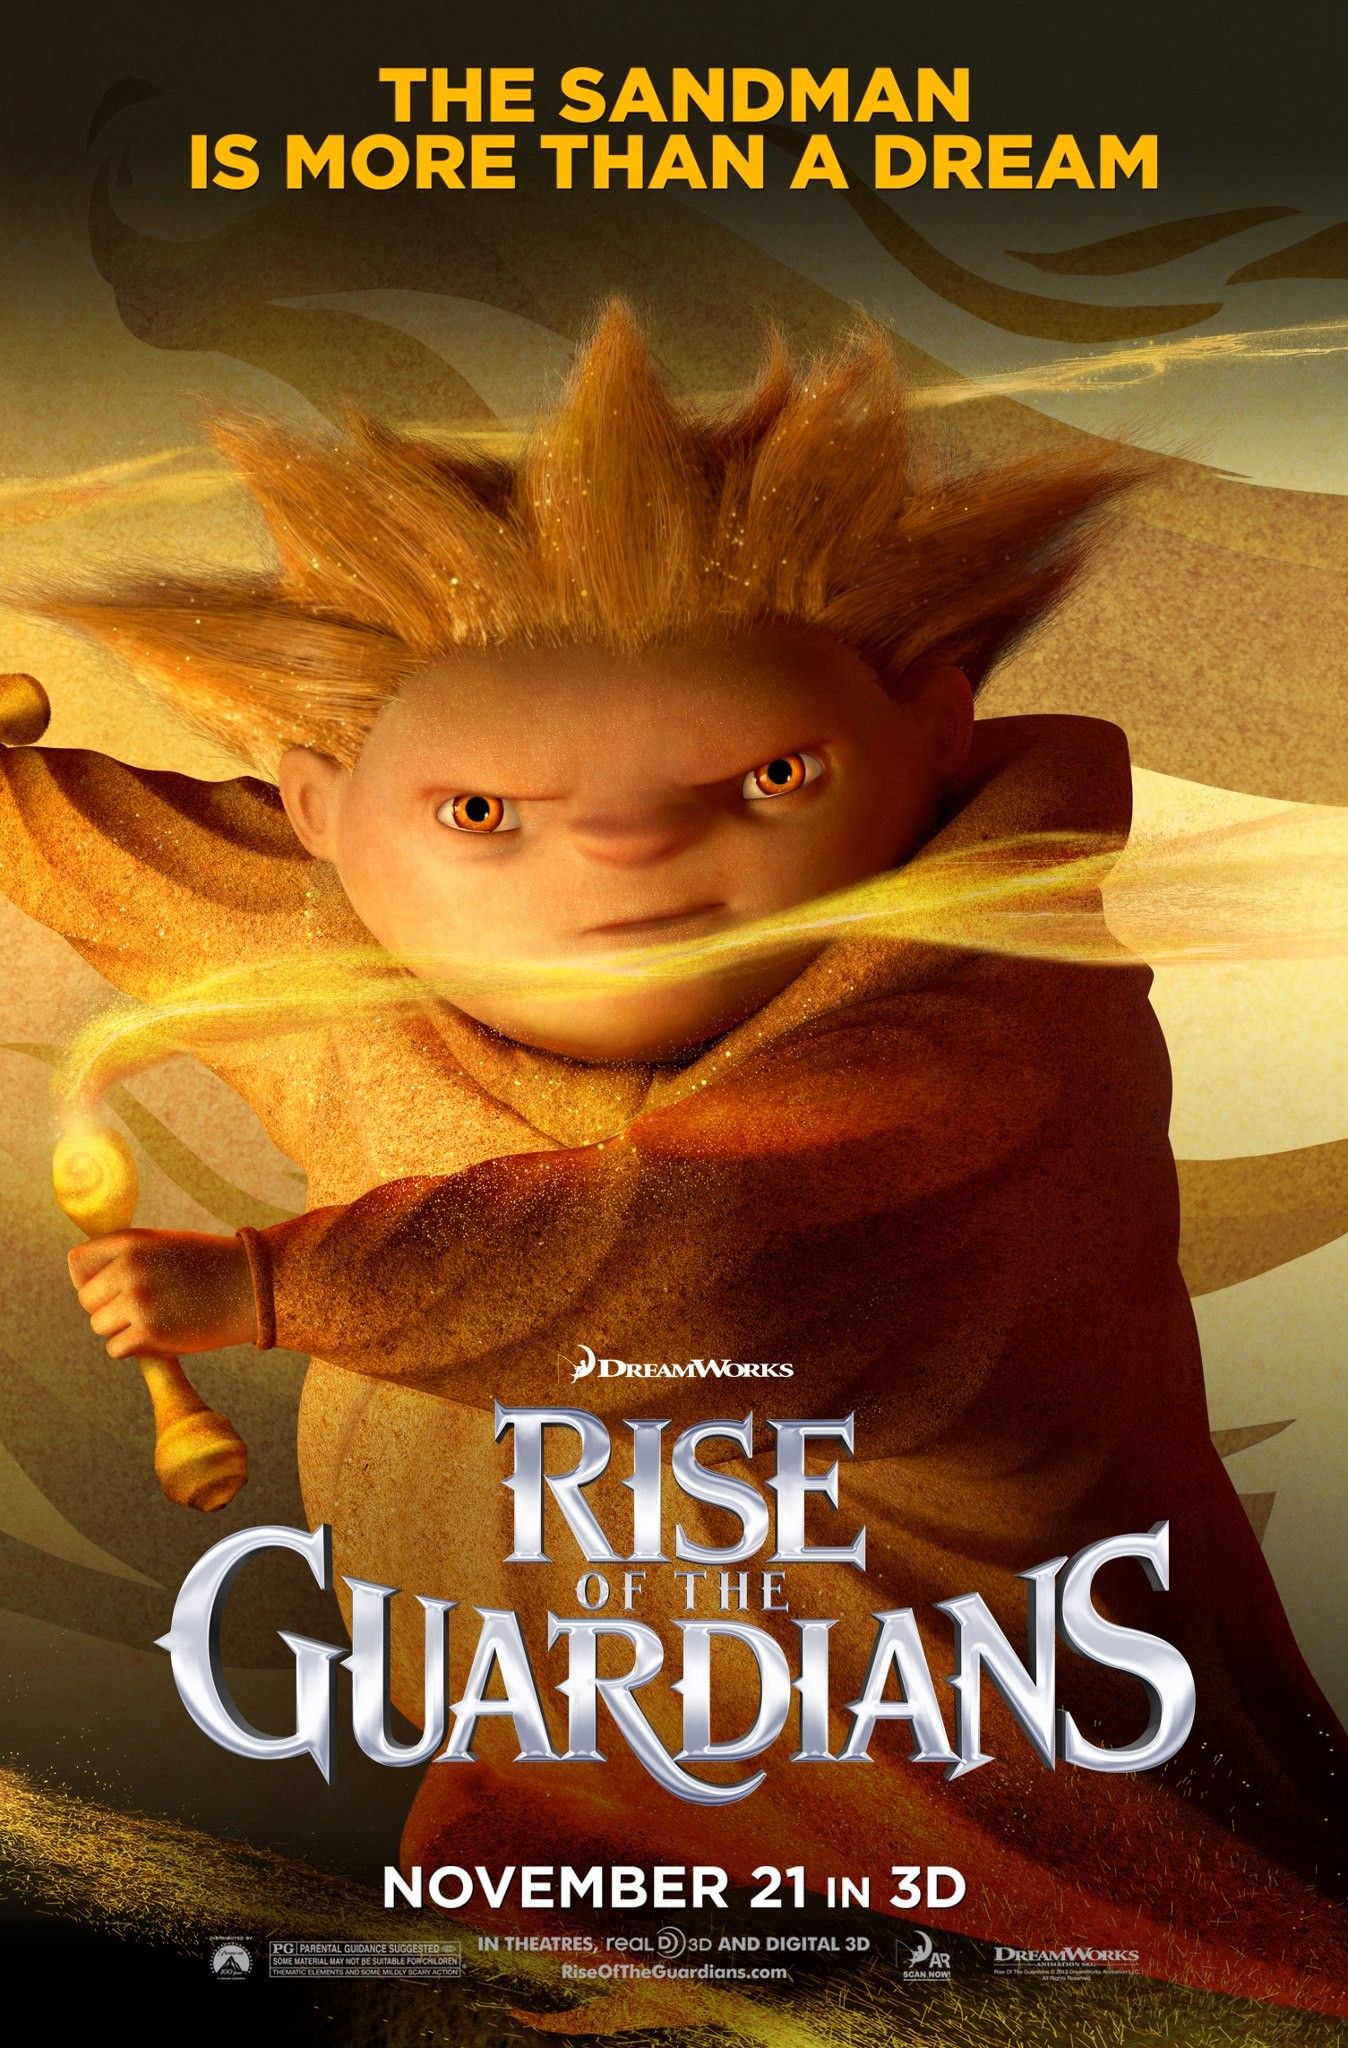 Rise of the Guardians Sandman Character Poster